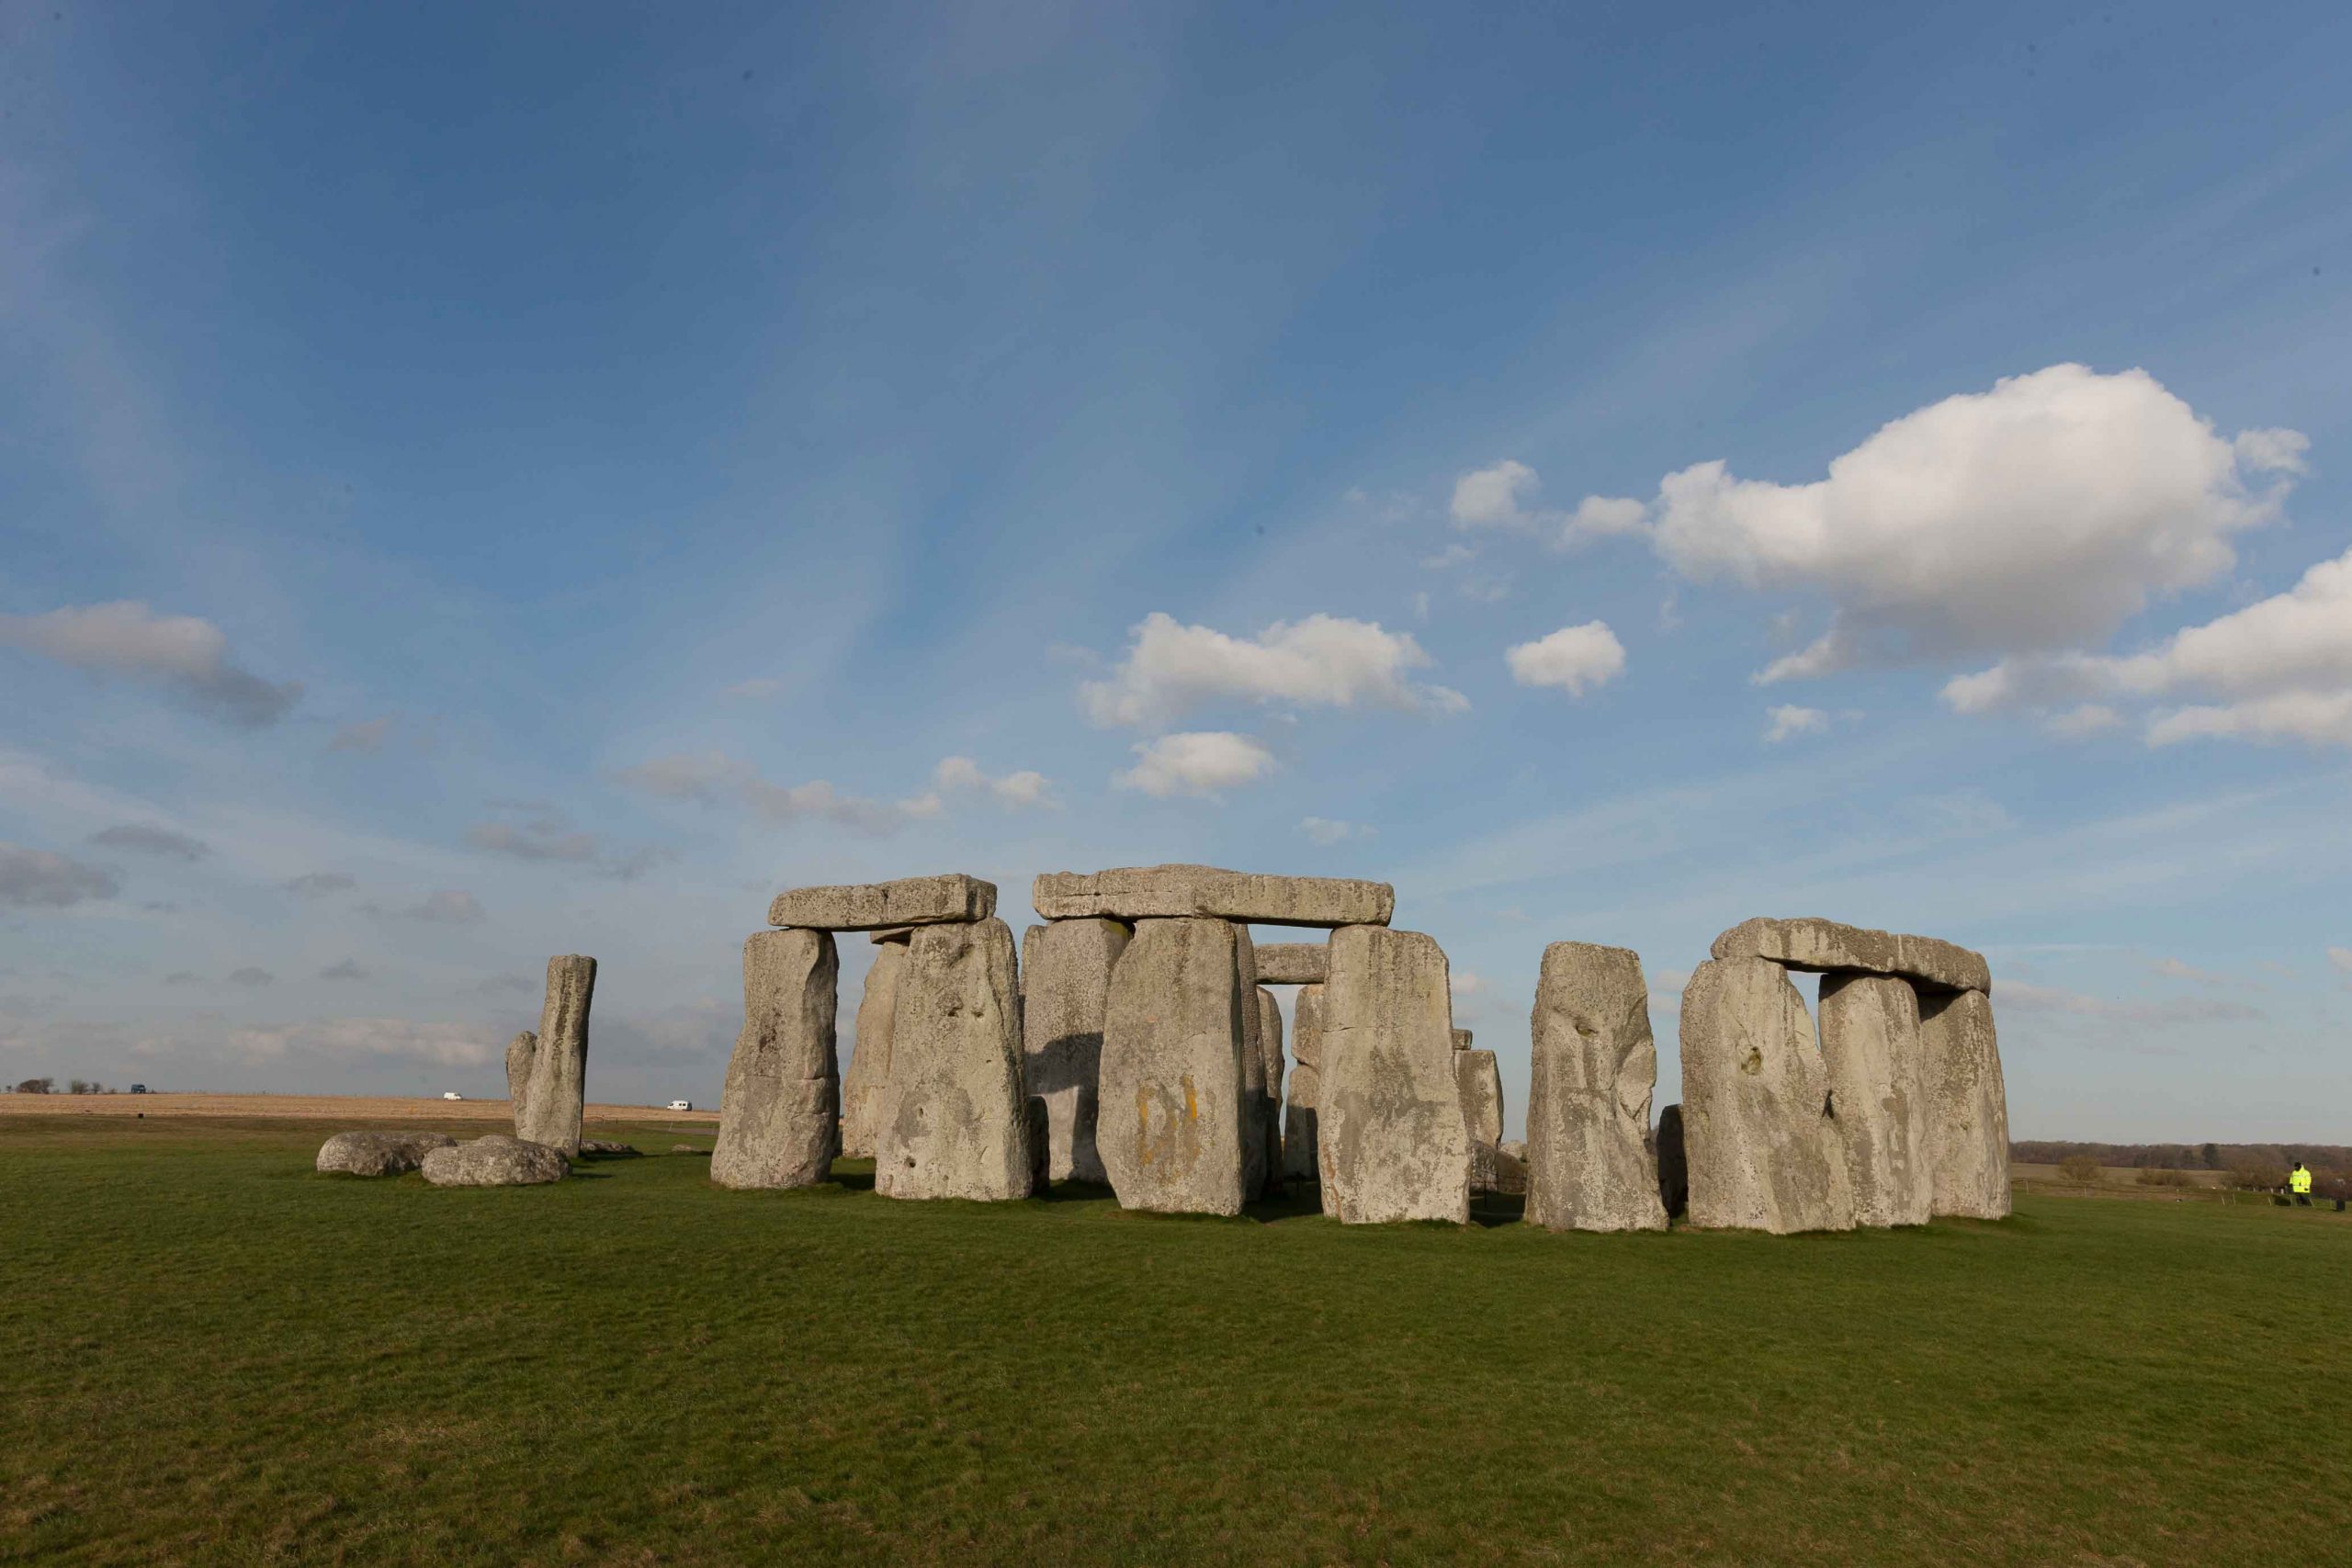 Observations and activities at Stonehenge